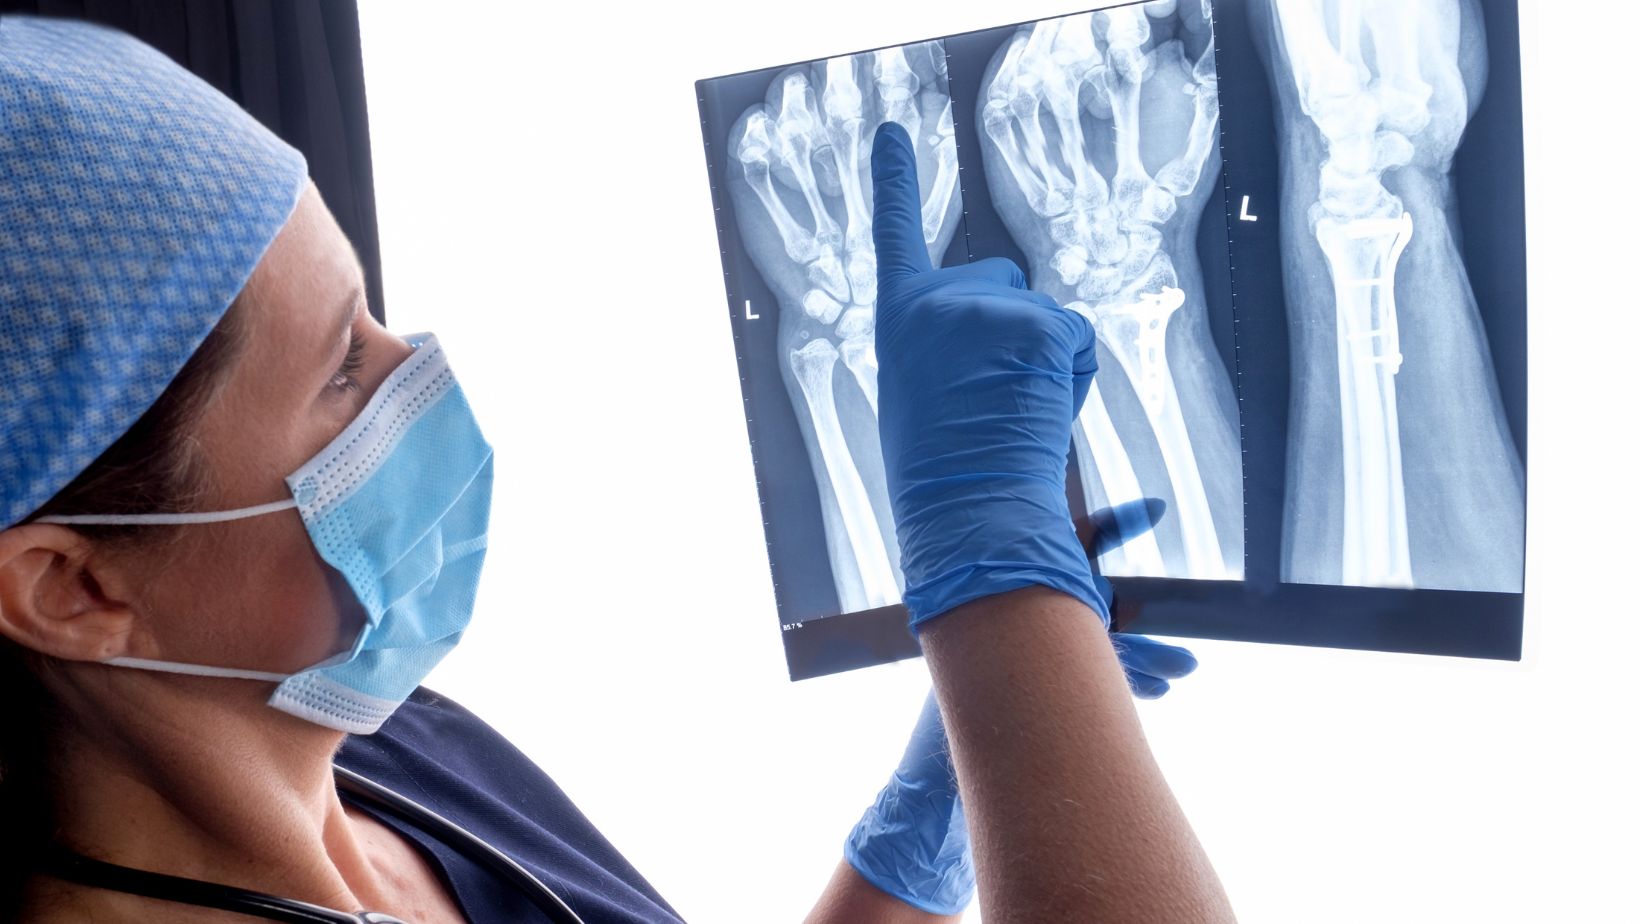 Understanding Orthopedic Procedures: How To Know If You Should Visit A Doctor